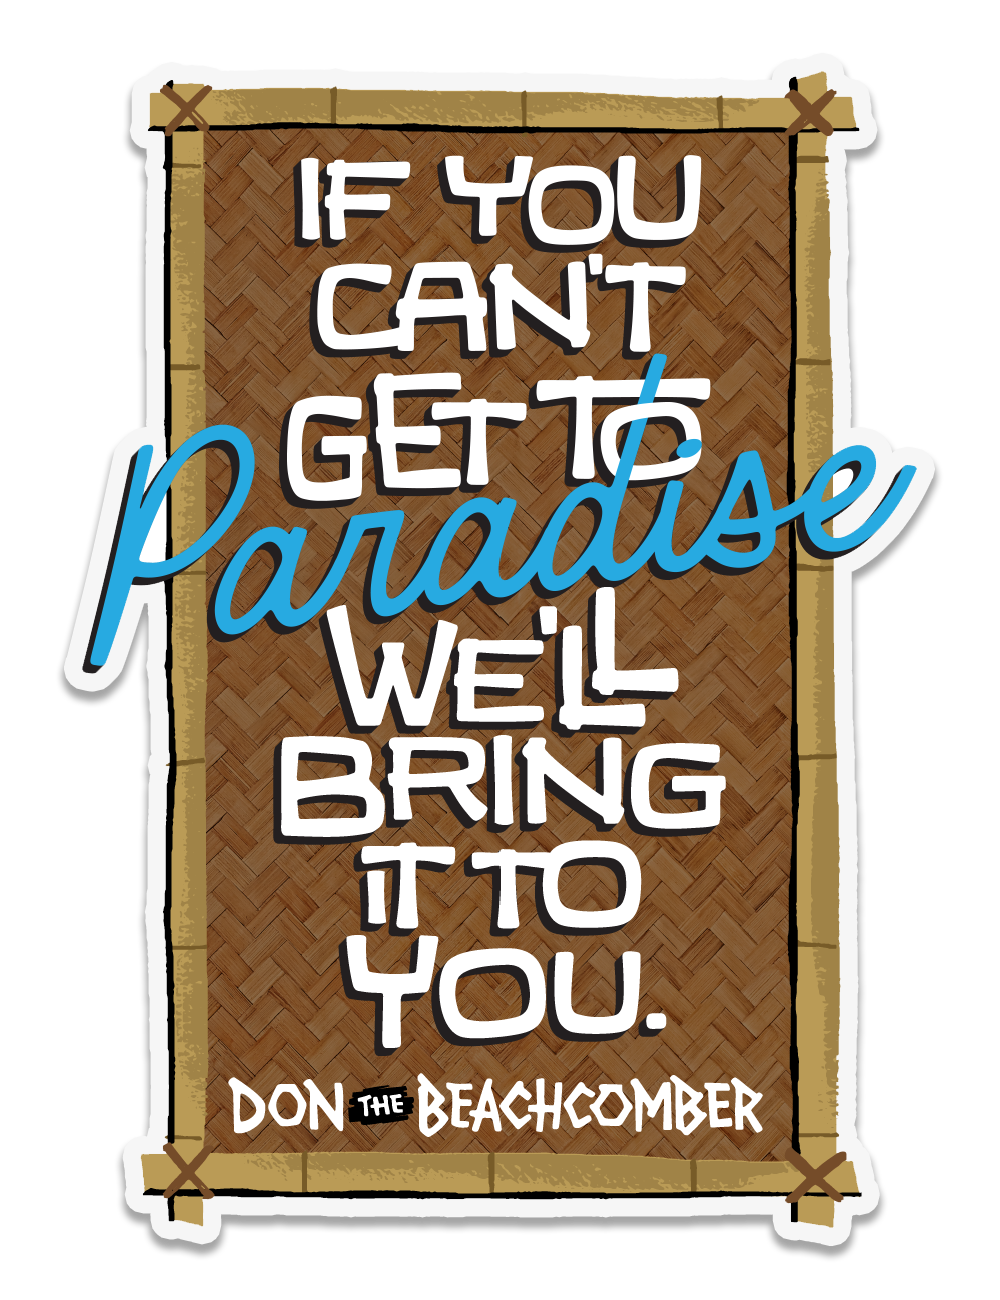 We'll Bring Paradise to you Vinyl Sticker